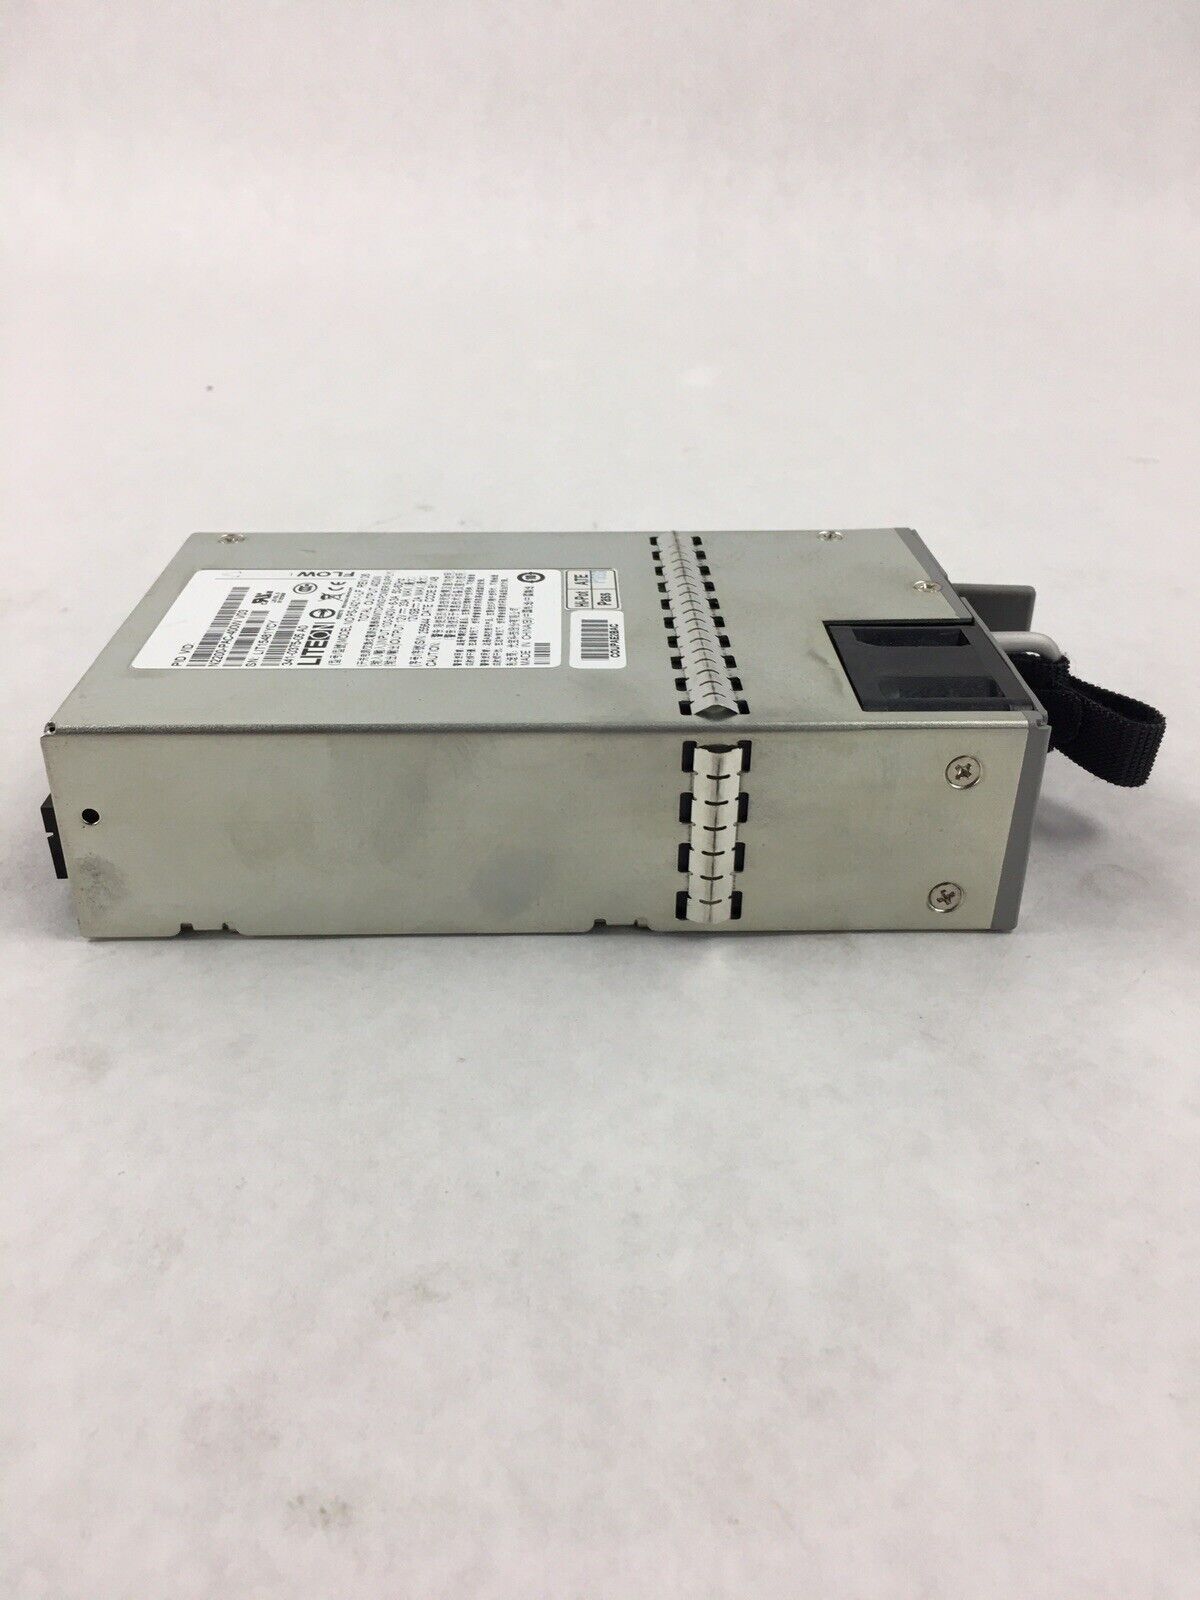 Lot of 2 Liteon PS-2421-1-LF 400W 6.0A 240V 60Hz  Power Supply TESTED